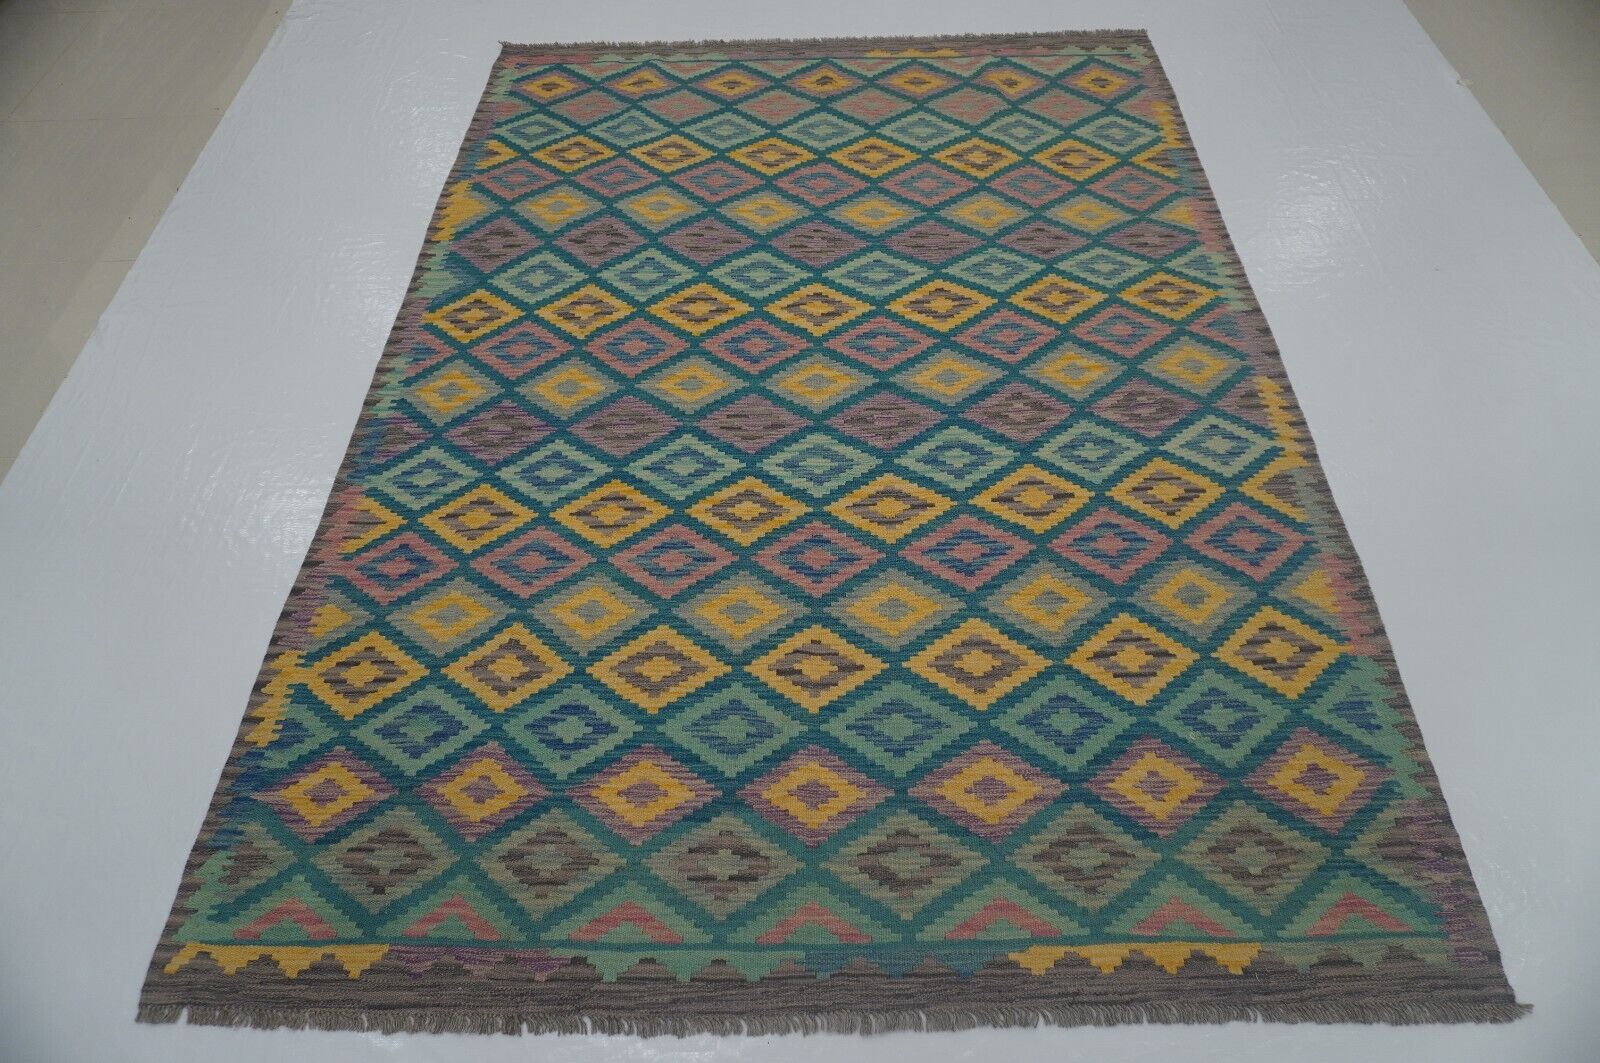 6x8 Turquoise Blue Reversible Afghan Hand Woven Wool Bohemian Area Rug 6\'0\